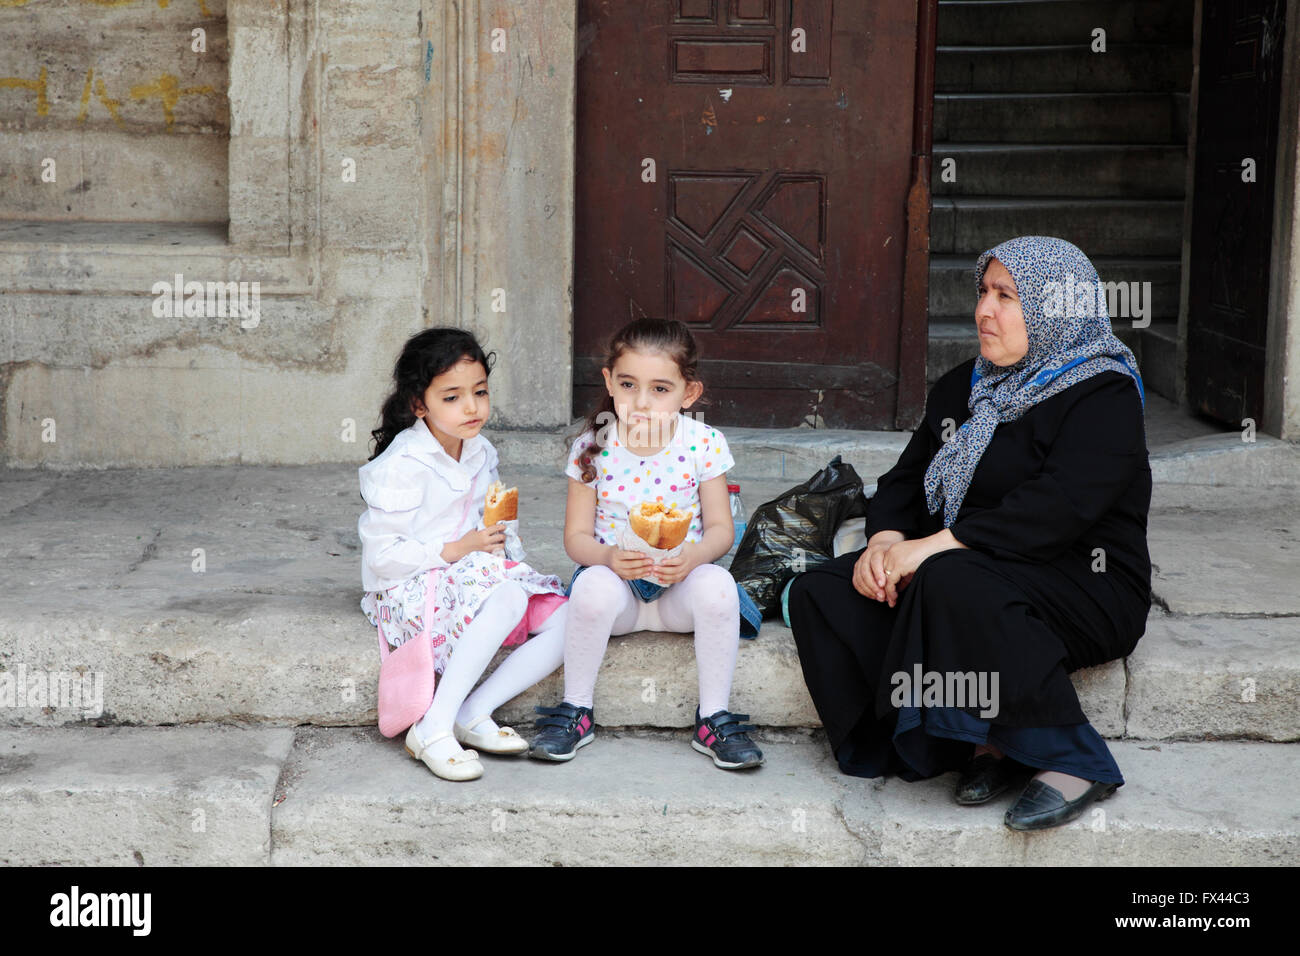 Two young children and a women, Istanbul, Turkey Stock Photo